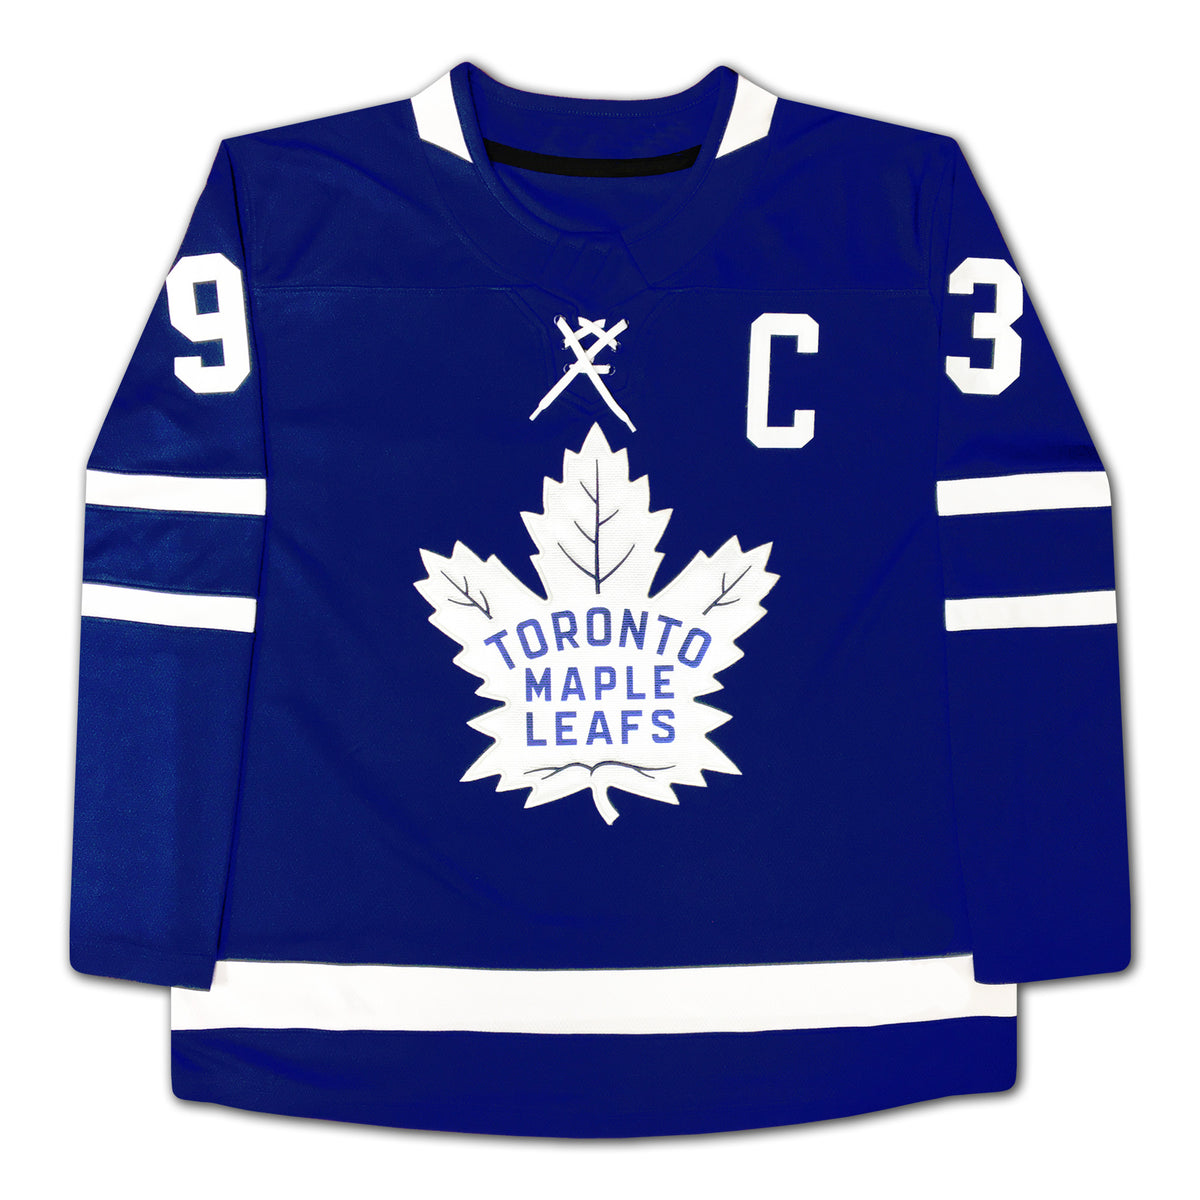 Doug Gilmour Autographed White Toronto Maple Leafs Jersey at